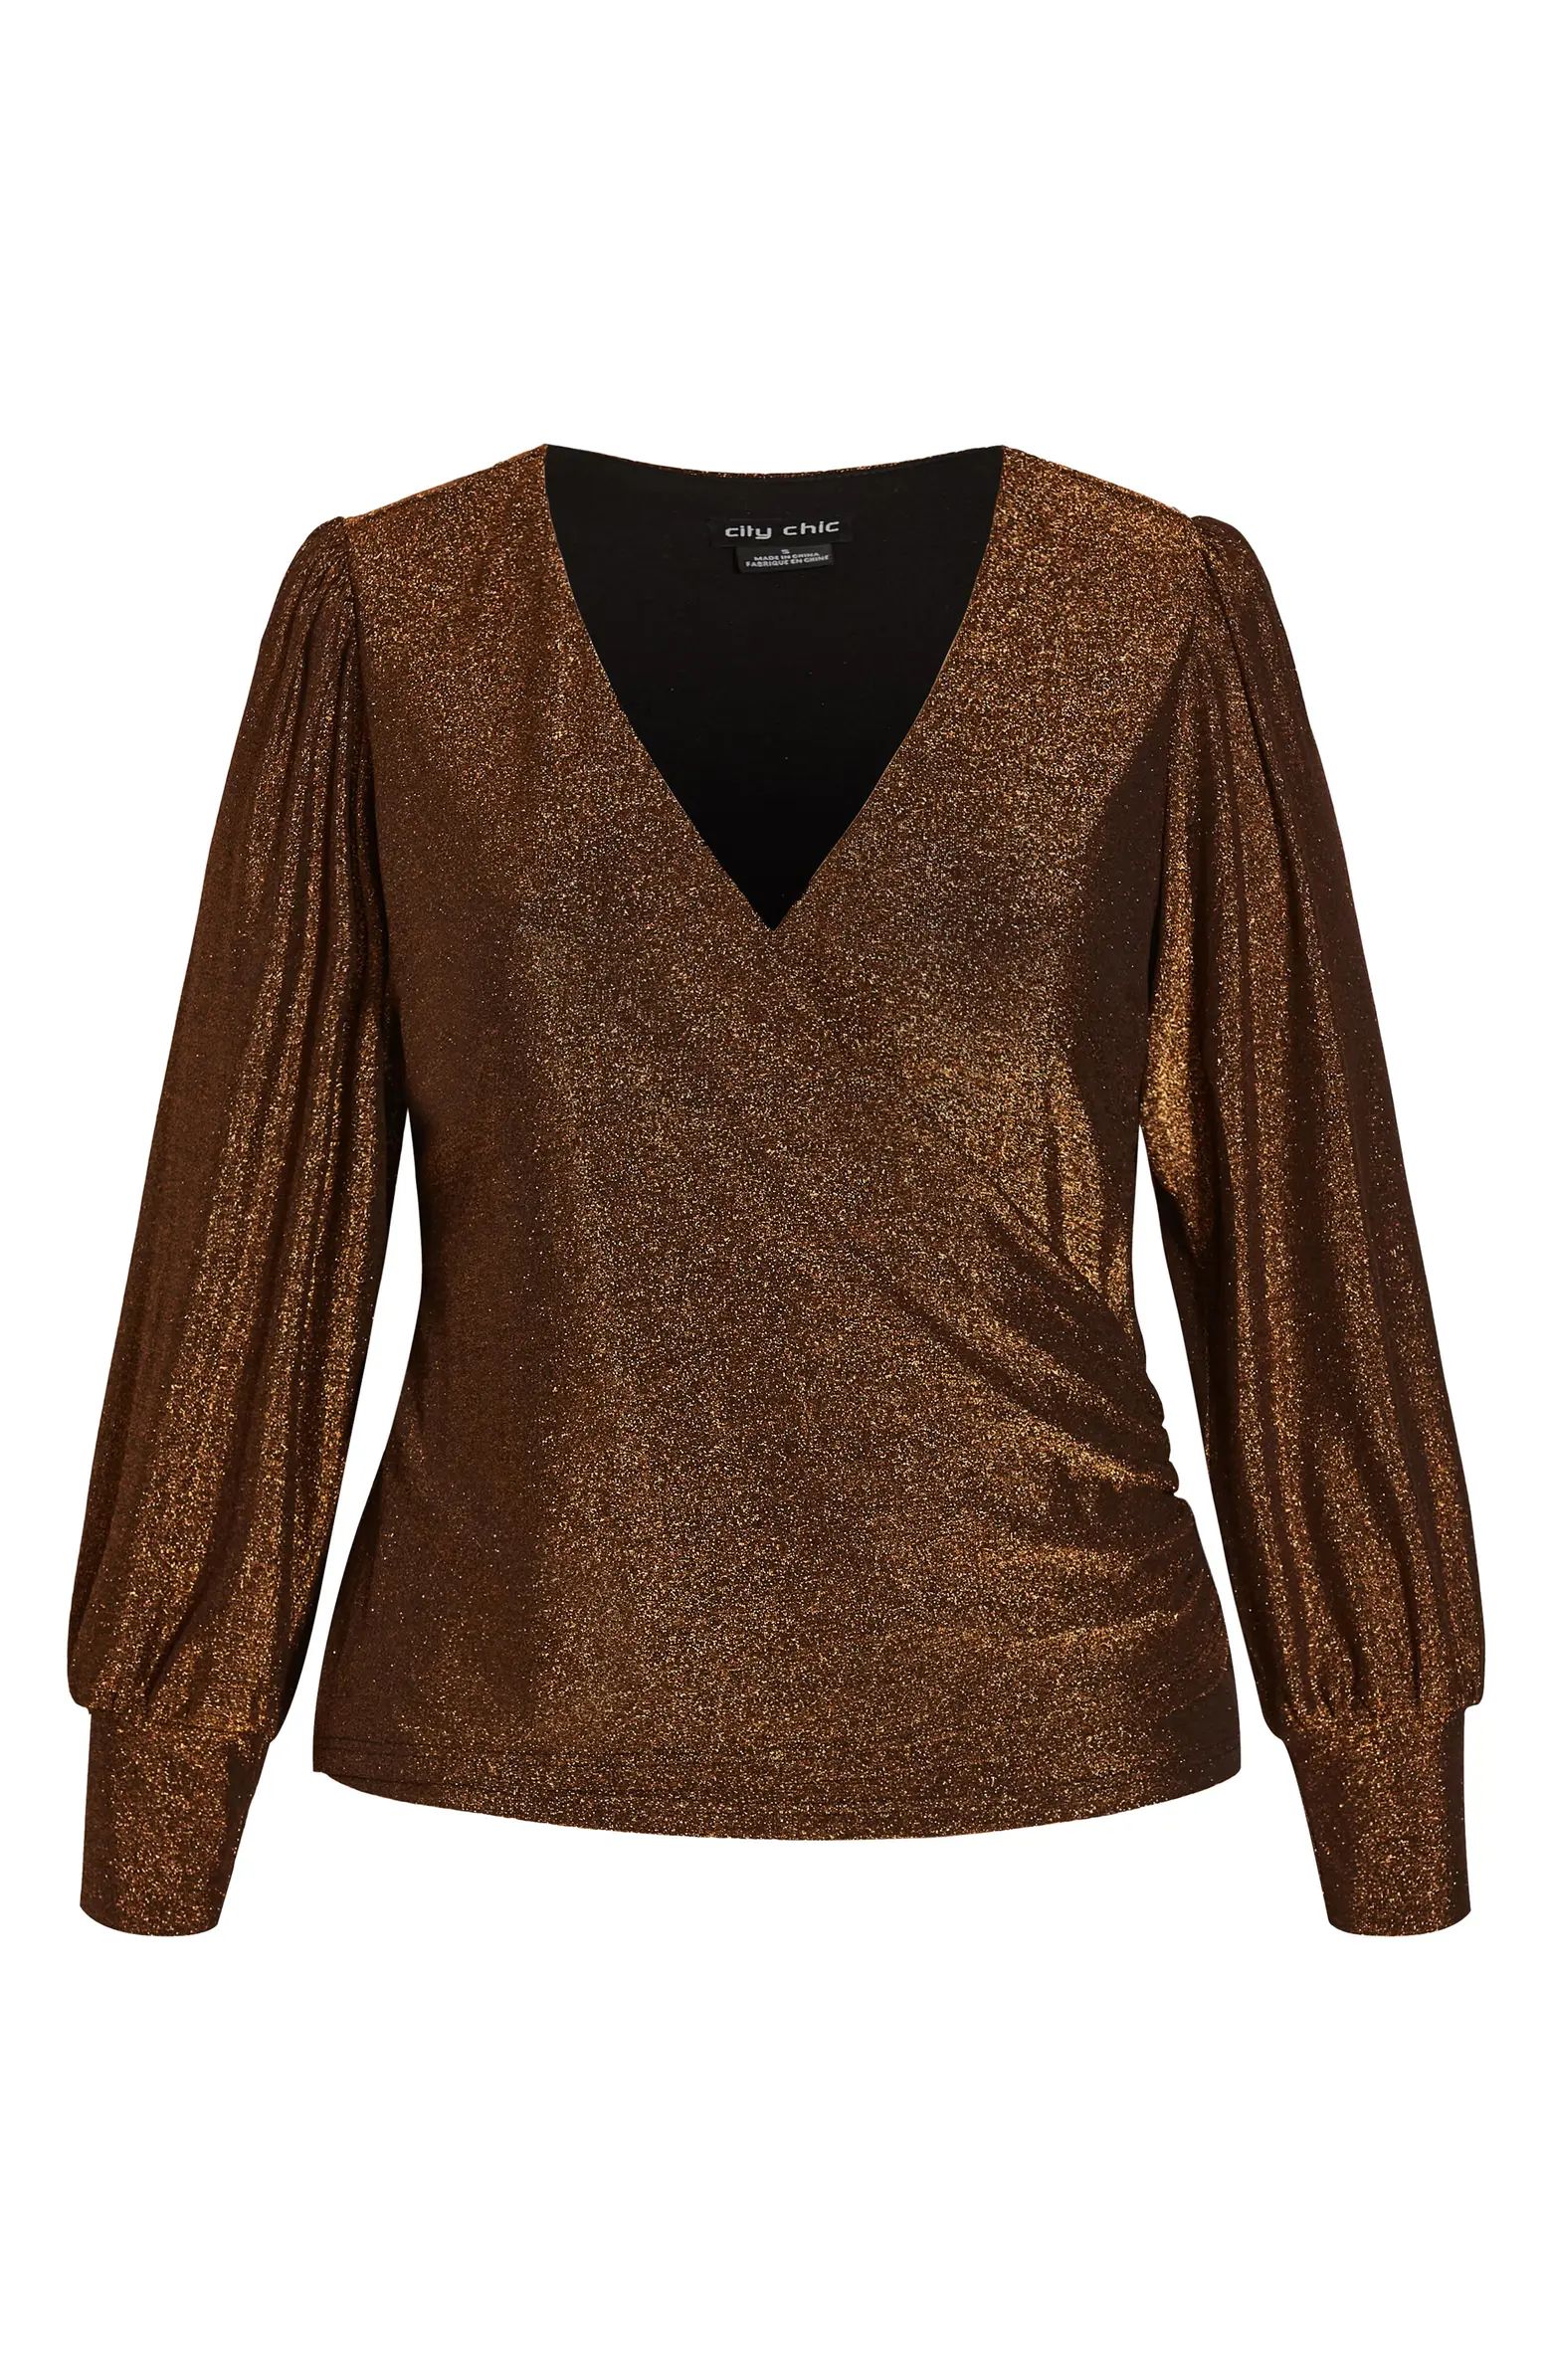 City Chic Glowing Shimmer Faux Wrap Top | Nordstrom | Nordstrom